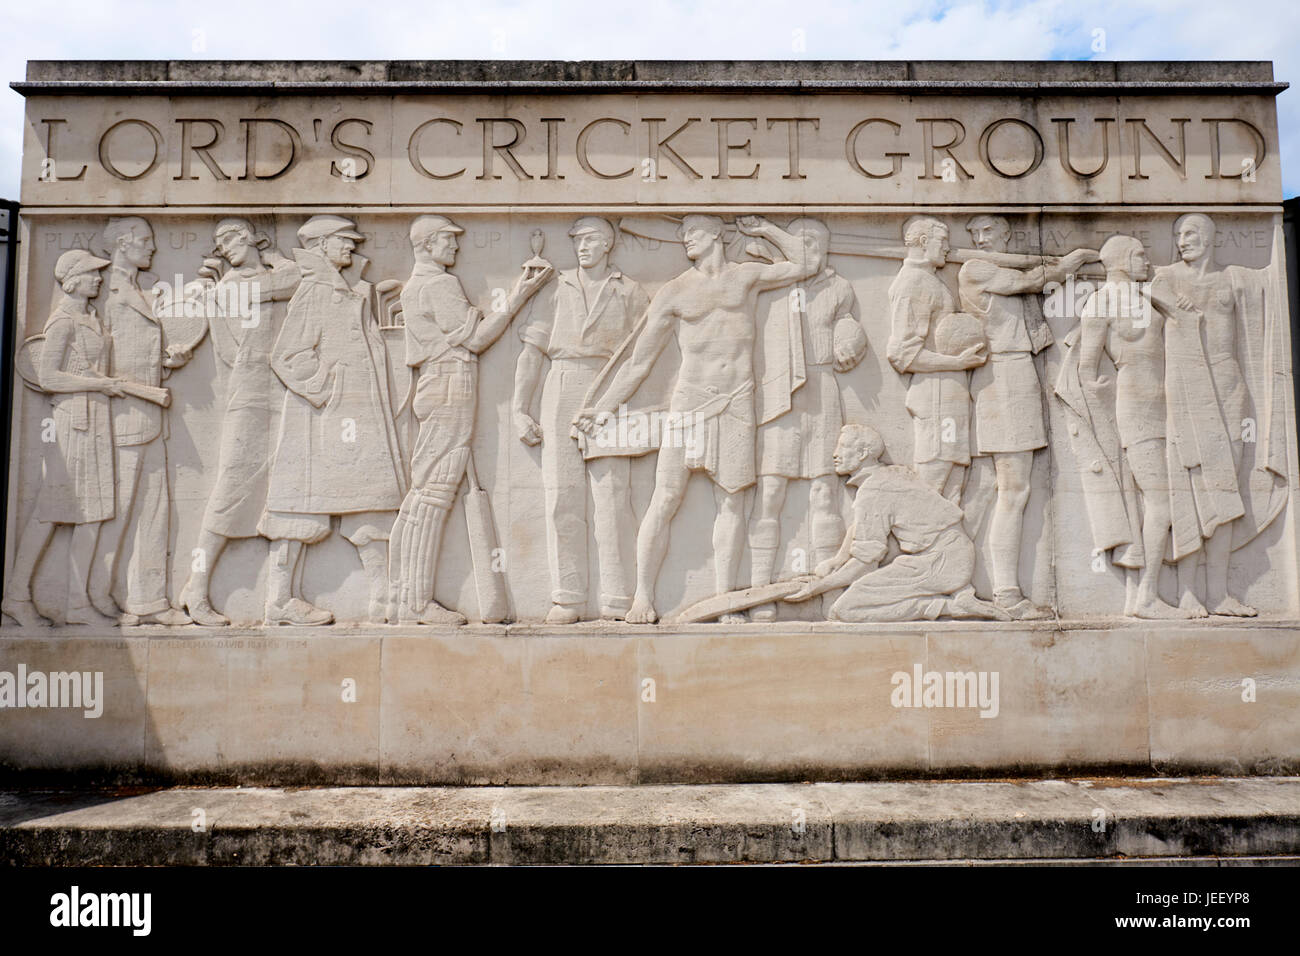 Sculptural Frieze Outside Lords Cricket Ground Showing Cricketers With The Ashes, By Gilbert Bayes, St Johns Wood Road, London, UK Stock Photo